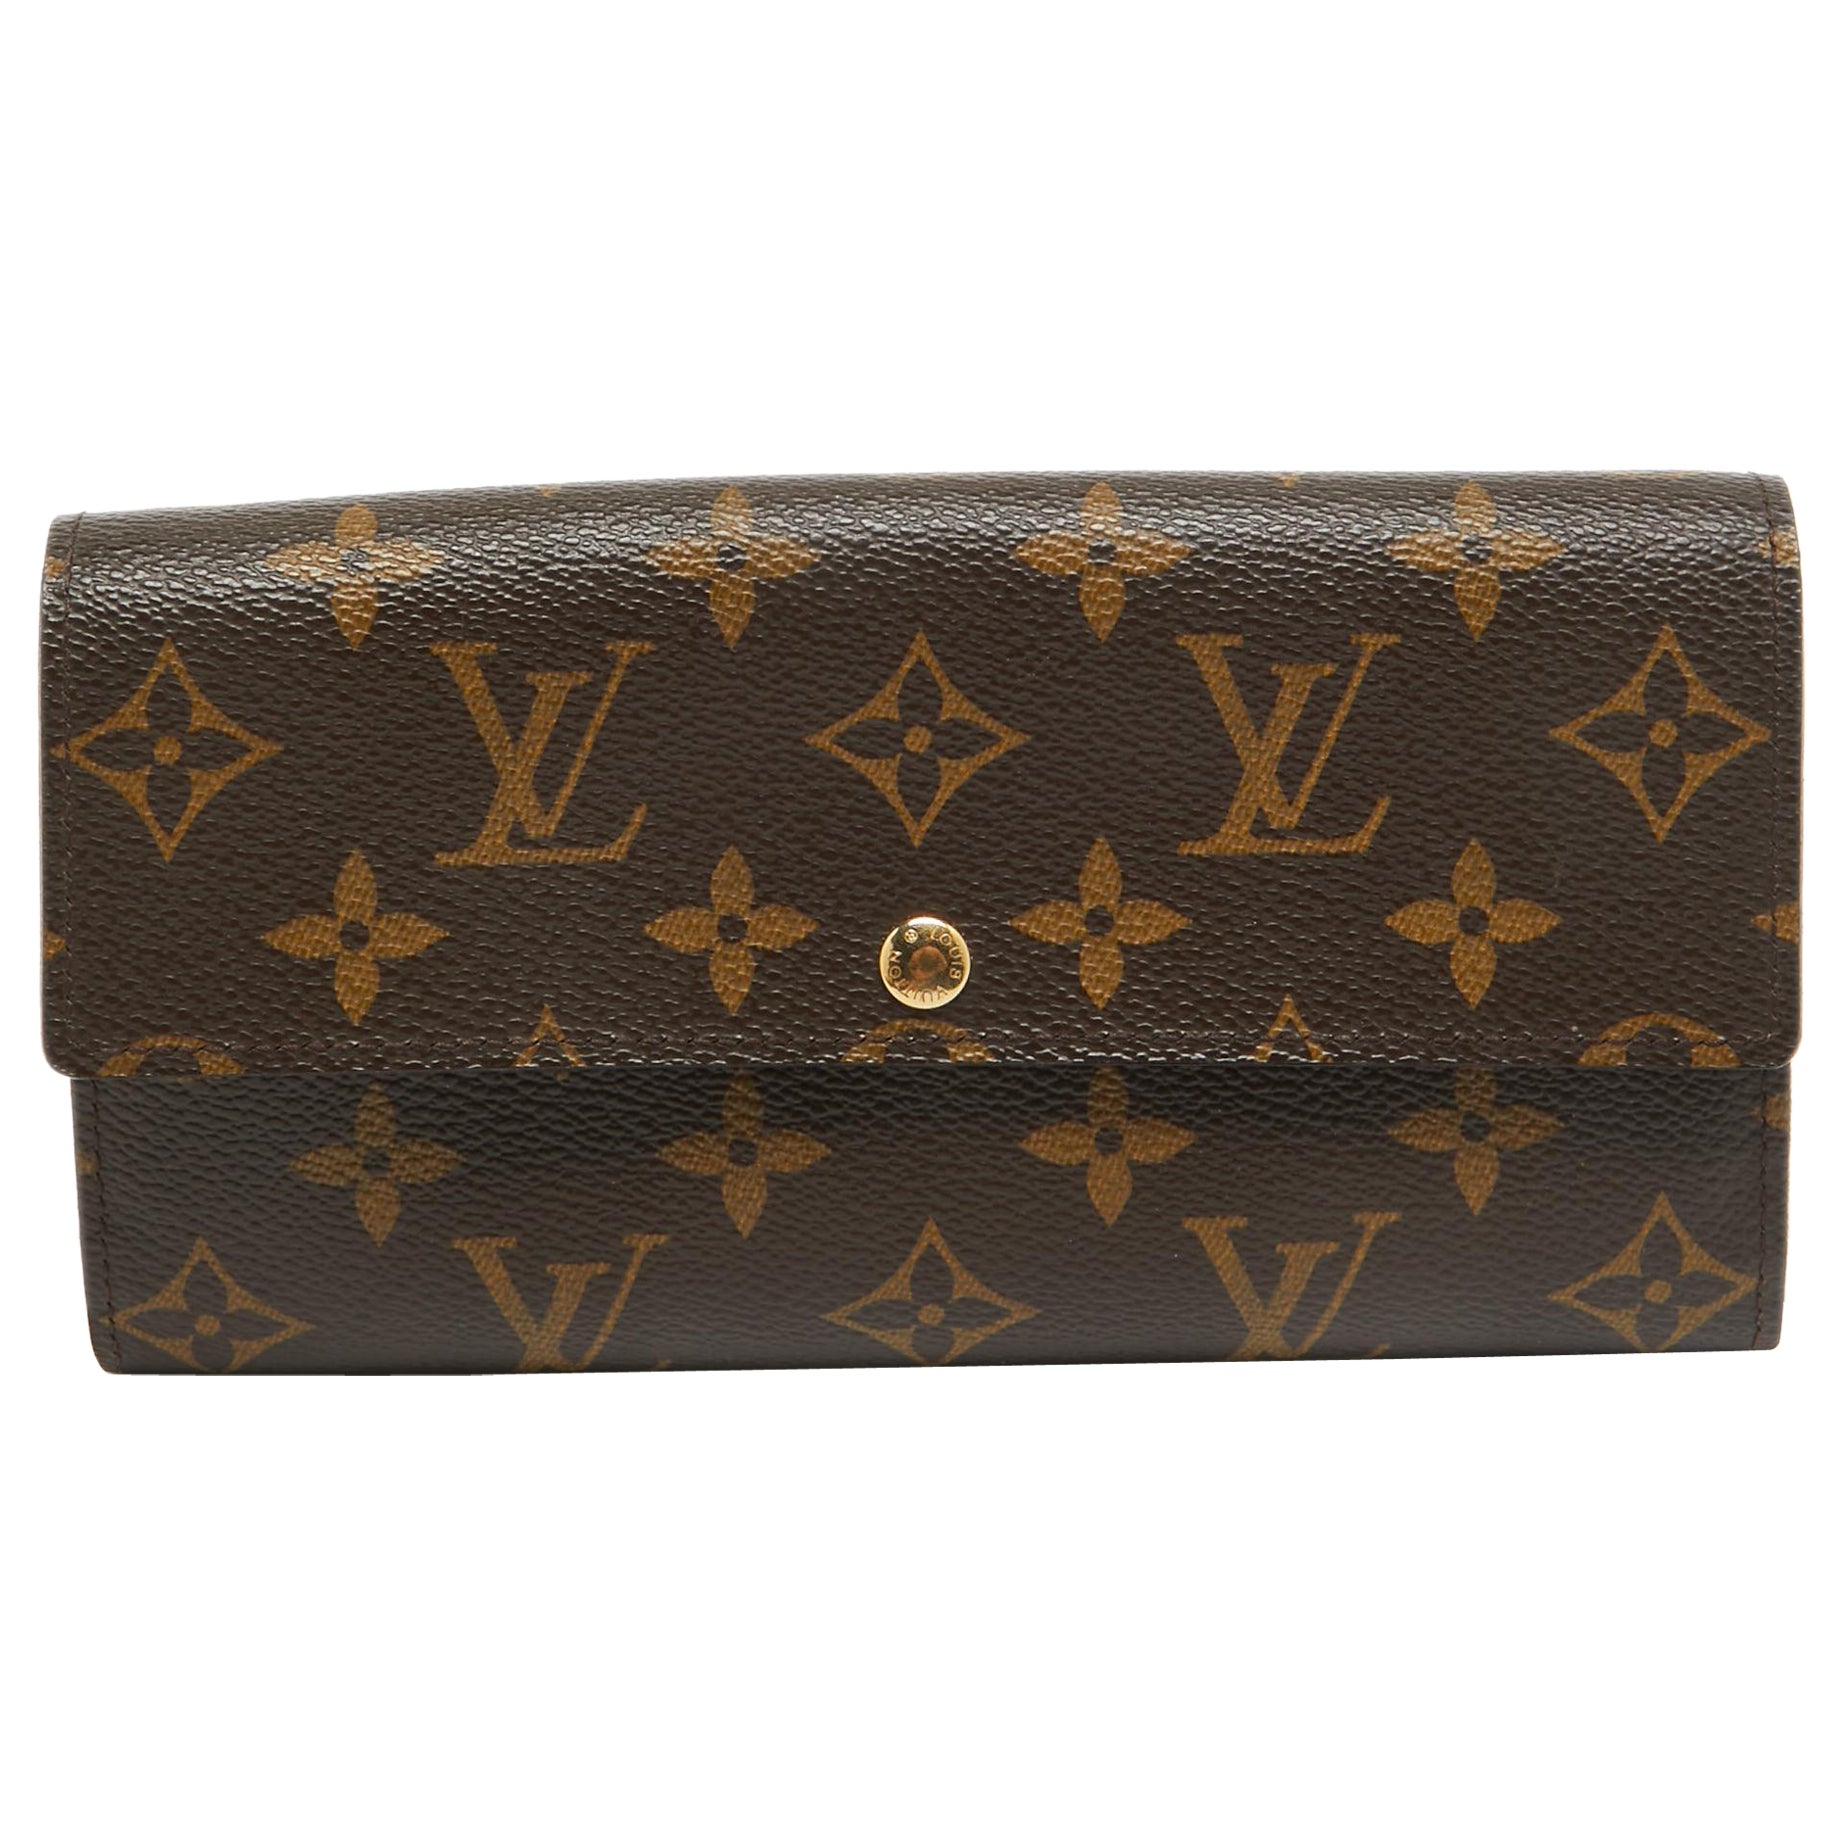 Where is the date code on a Louis Vuitton wallet?